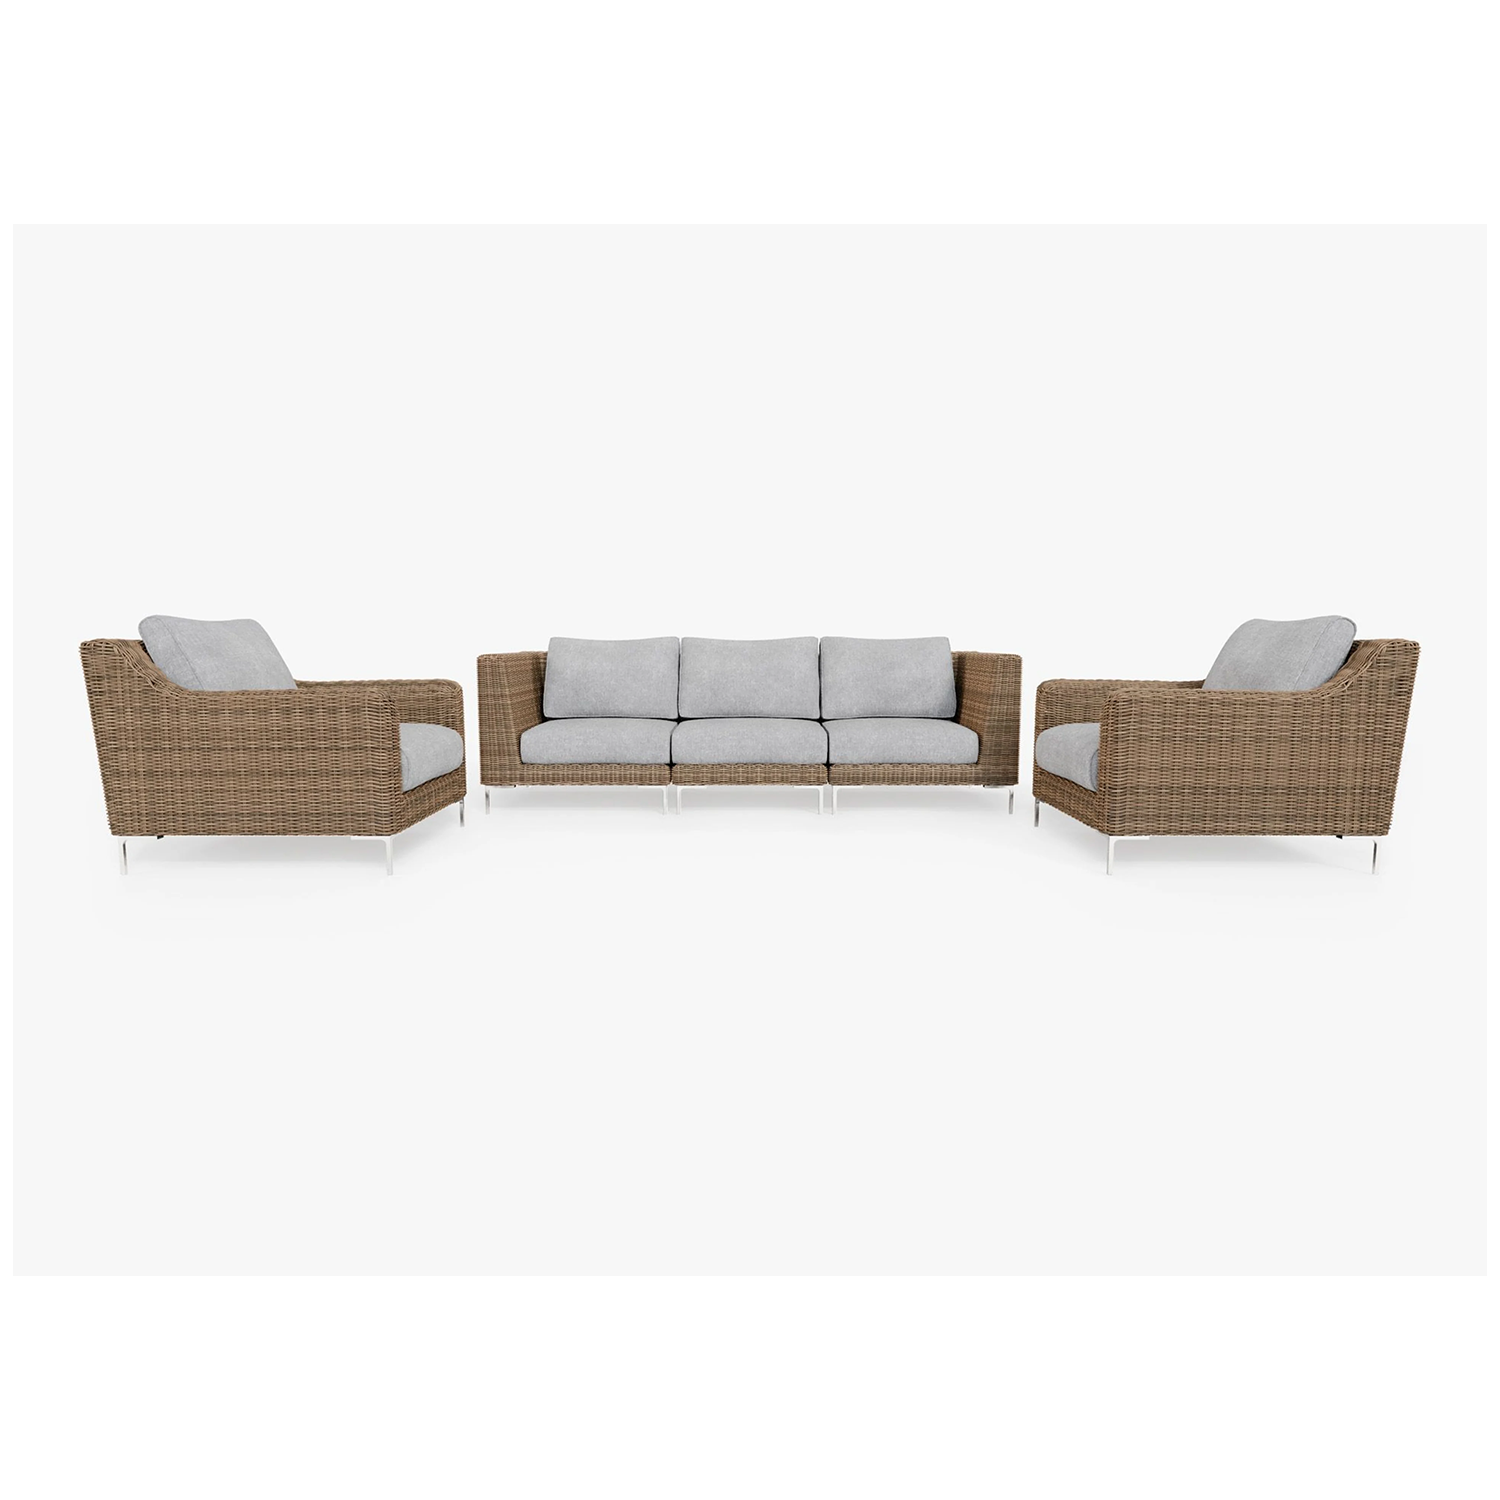 outer brown wicker outdoor sofa